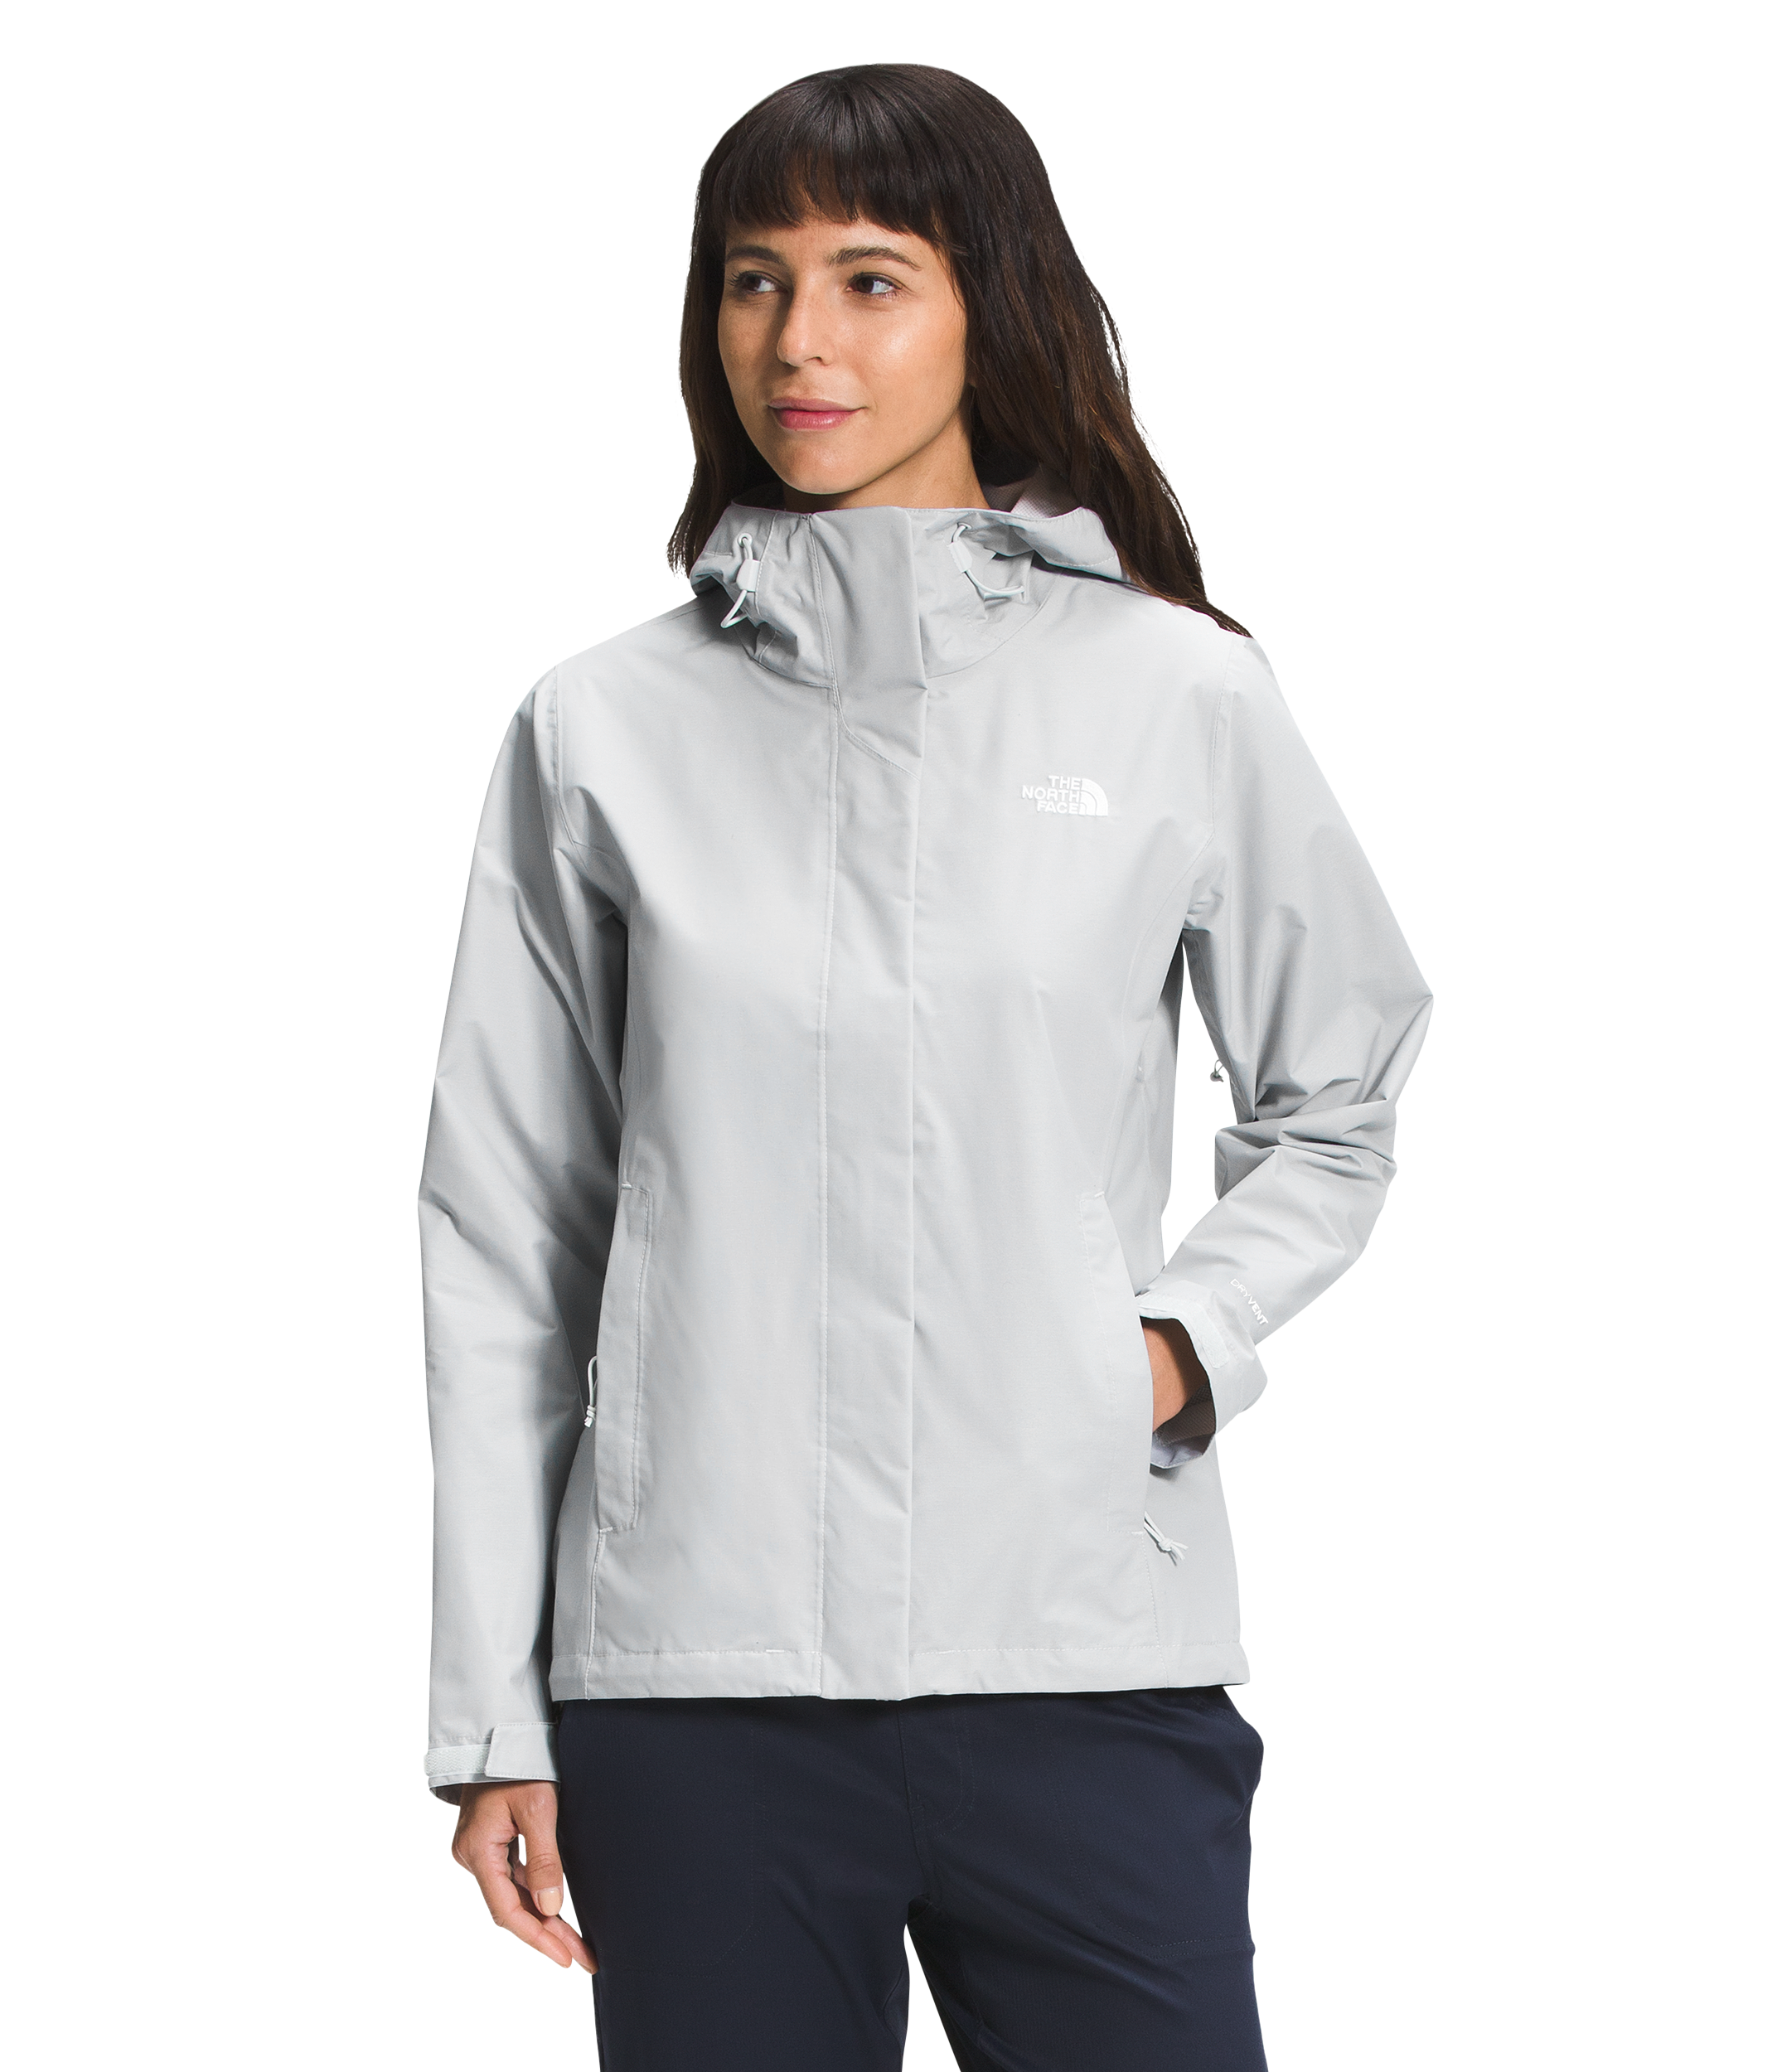 The North Face Venture 2 Jacket for Ladies